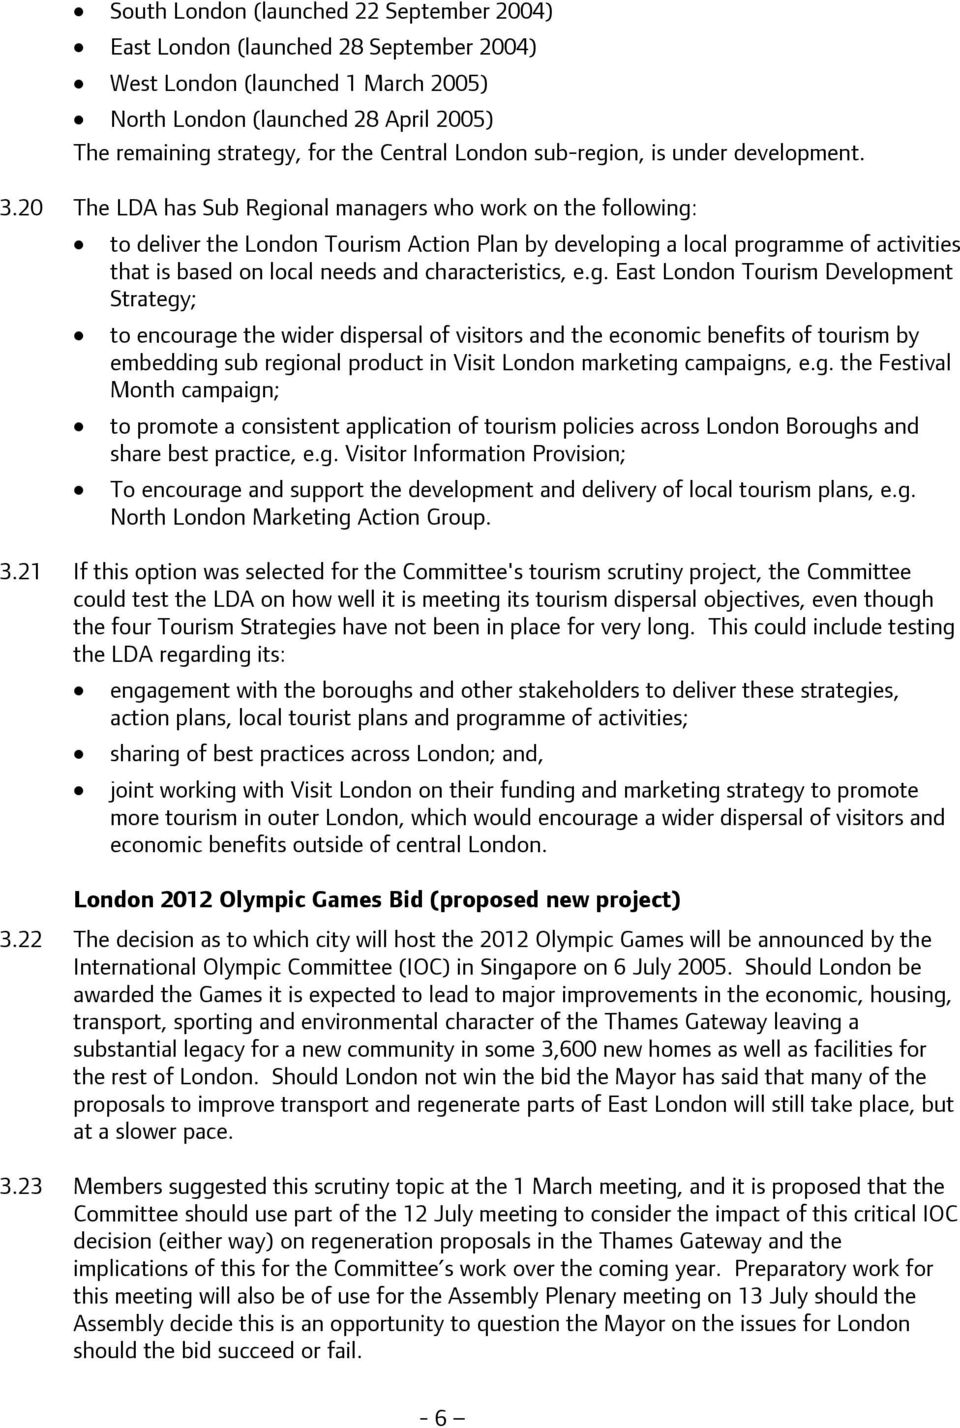 20 The LDA has Sub Regional managers who work on the following: to deliver the London Tourism Action Plan by developing a local programme of activities that is based on local needs and